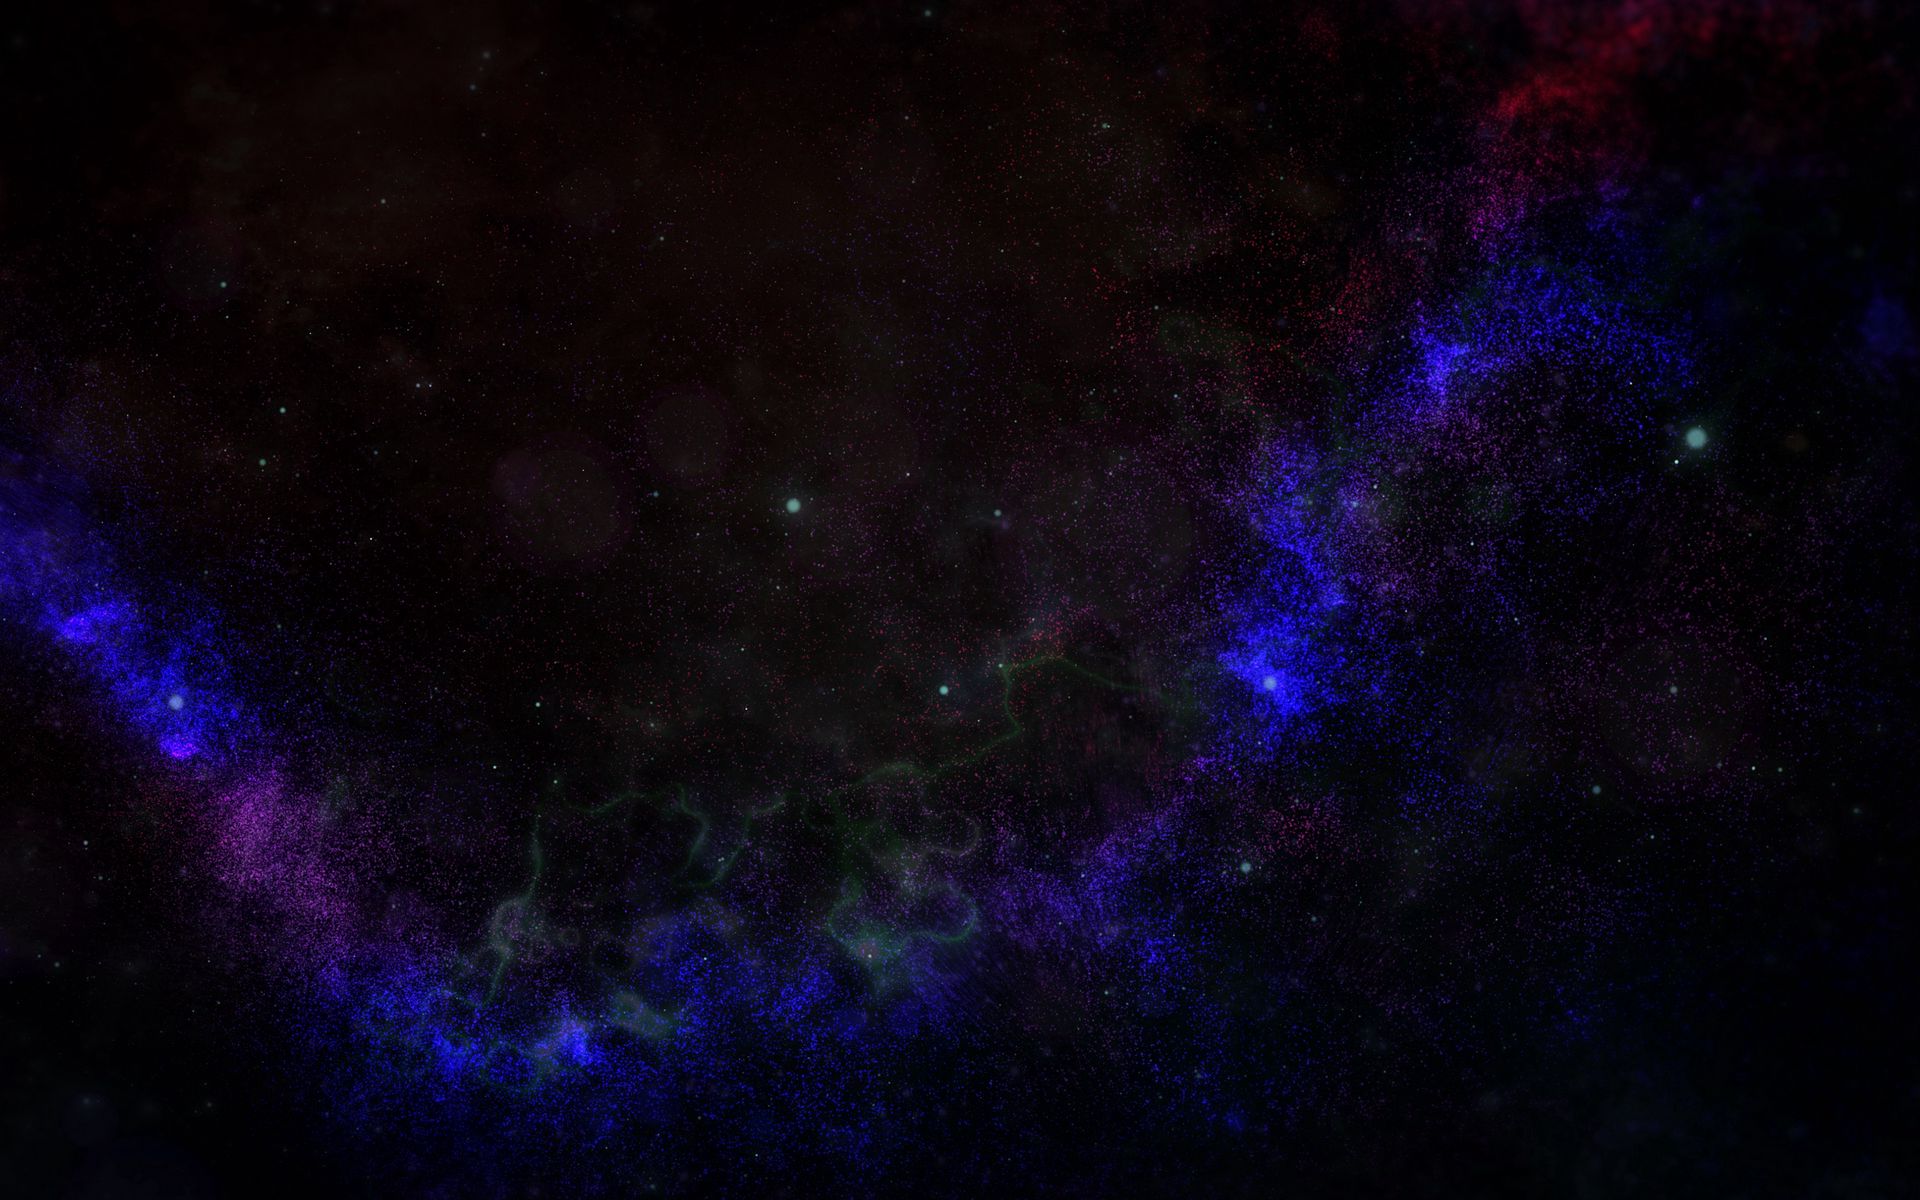 Download wallpaper 1920x1200 space, constellation, stars, astrology  widescreen 16:10 hd background